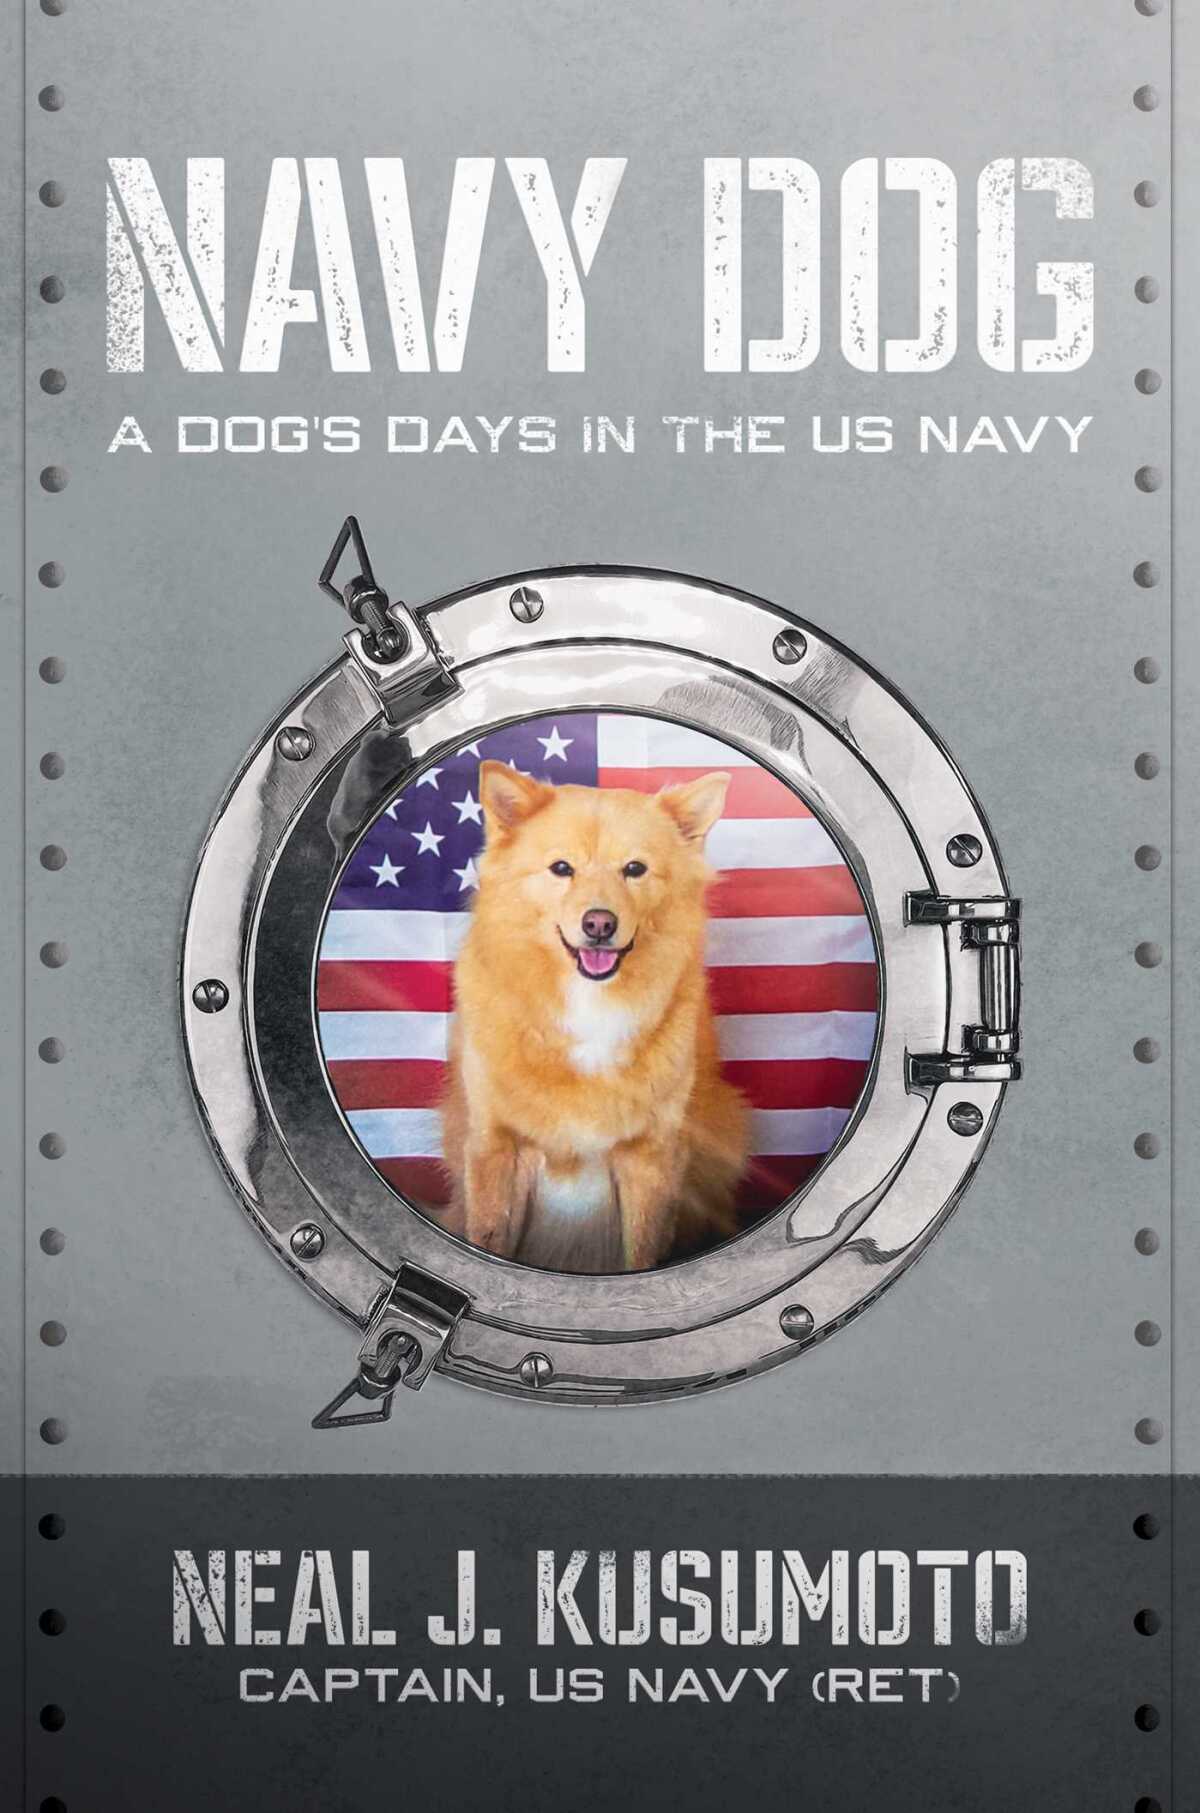 Point Loma resident Neal Kusumoto's first book, "Navy Dog: A Dog’s Days in the U.S. Navy," was published April 25.